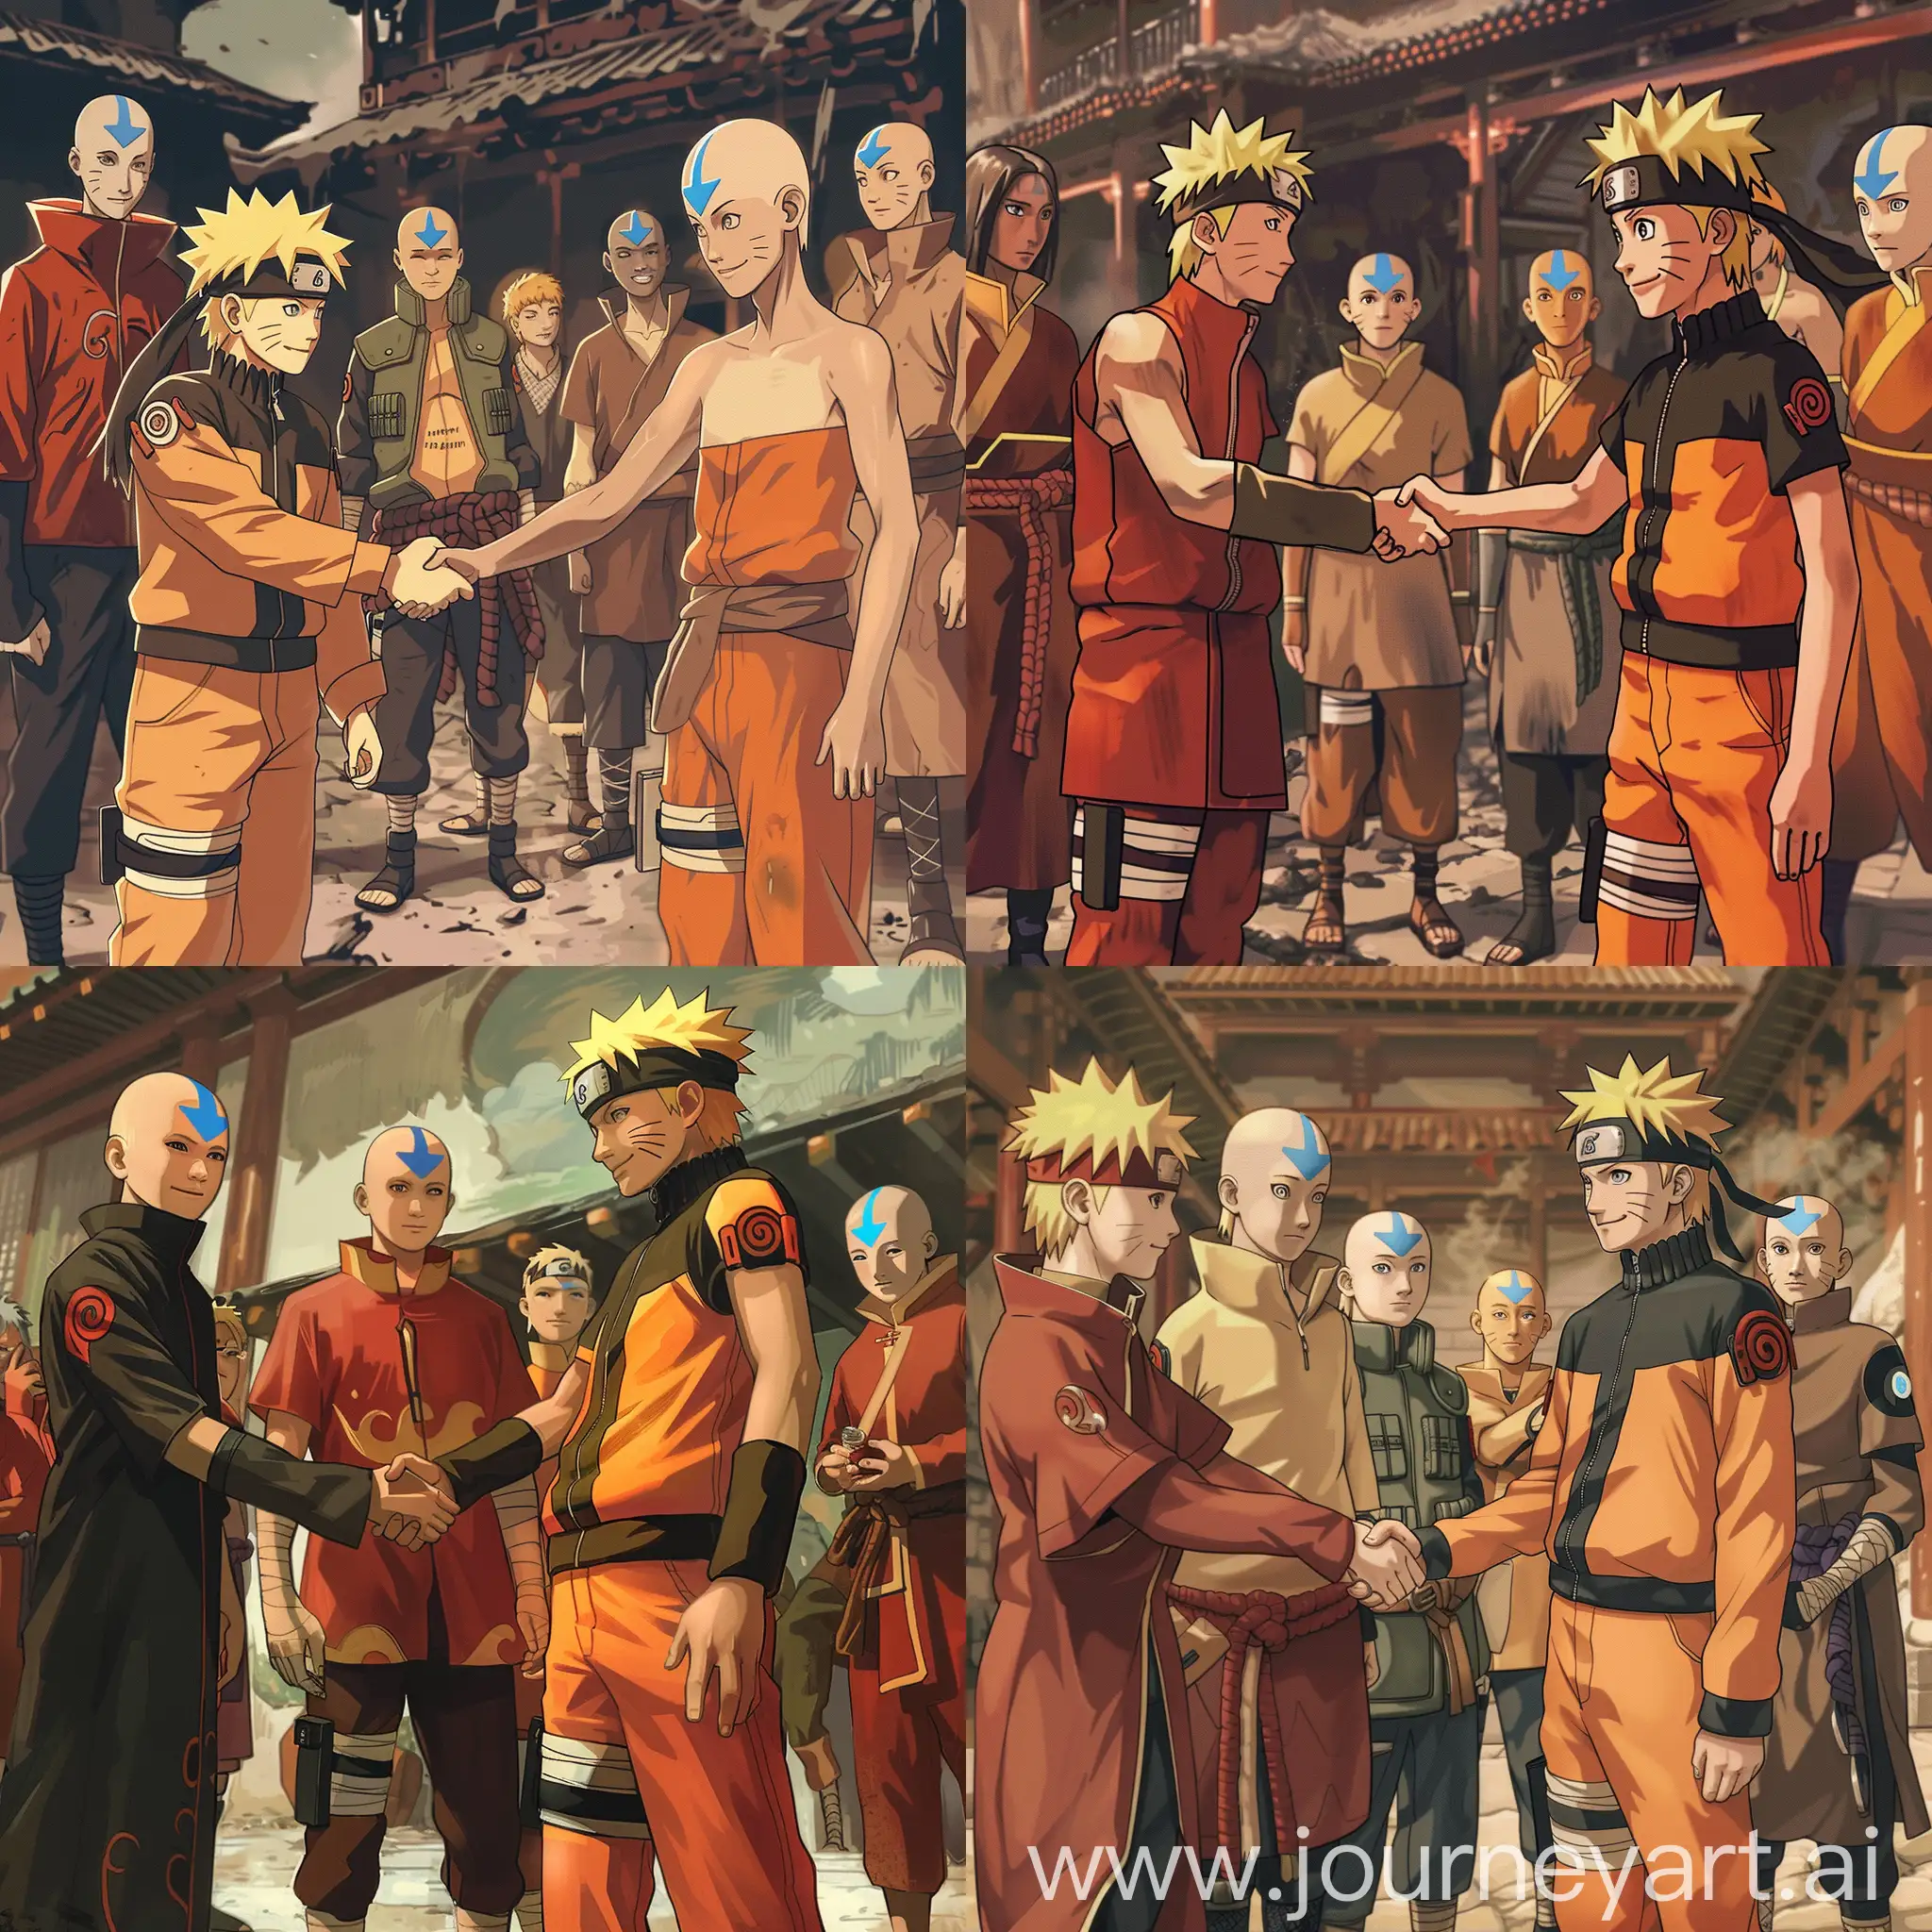 Naruto is shaking hand with Aang of the last Airbender. other characters of Naruto manga and the last Airbender cartoon are watching them,